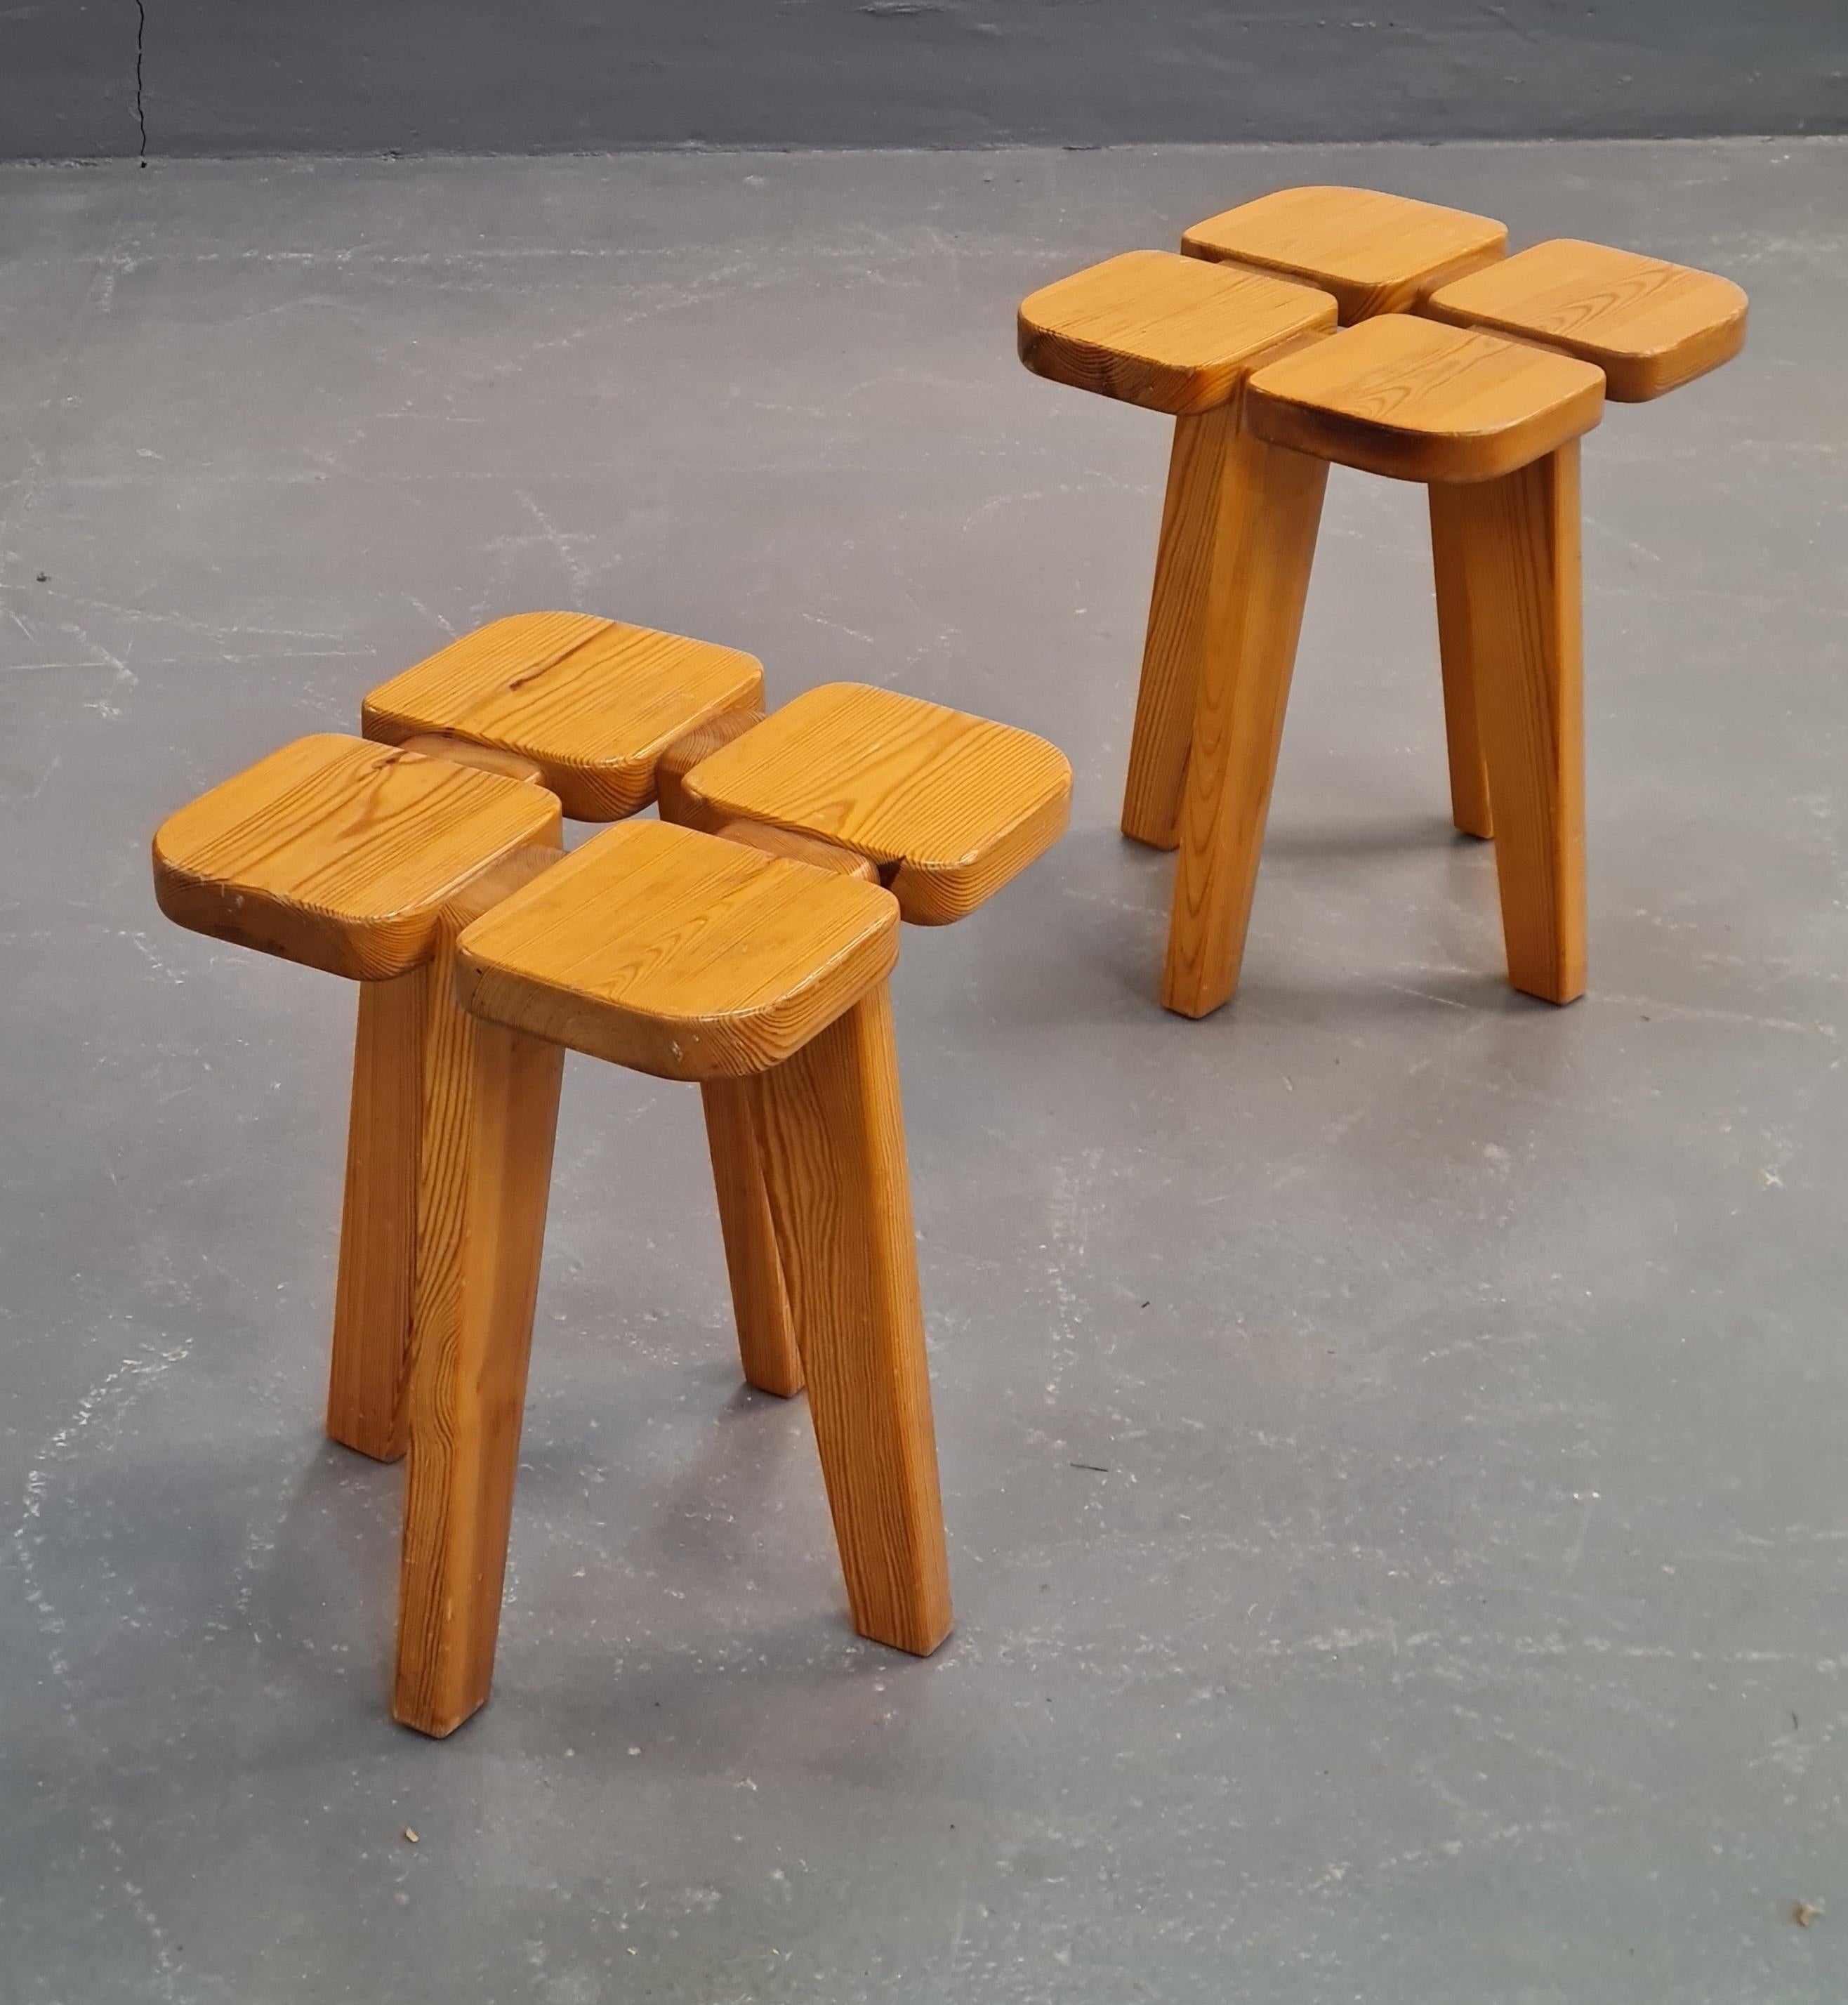 These stools represent four-leaf clovers, which are known as a sign of good luck. The quality of the materials and the craftmanship is outstanding. The stools are sturdy and in great condition.